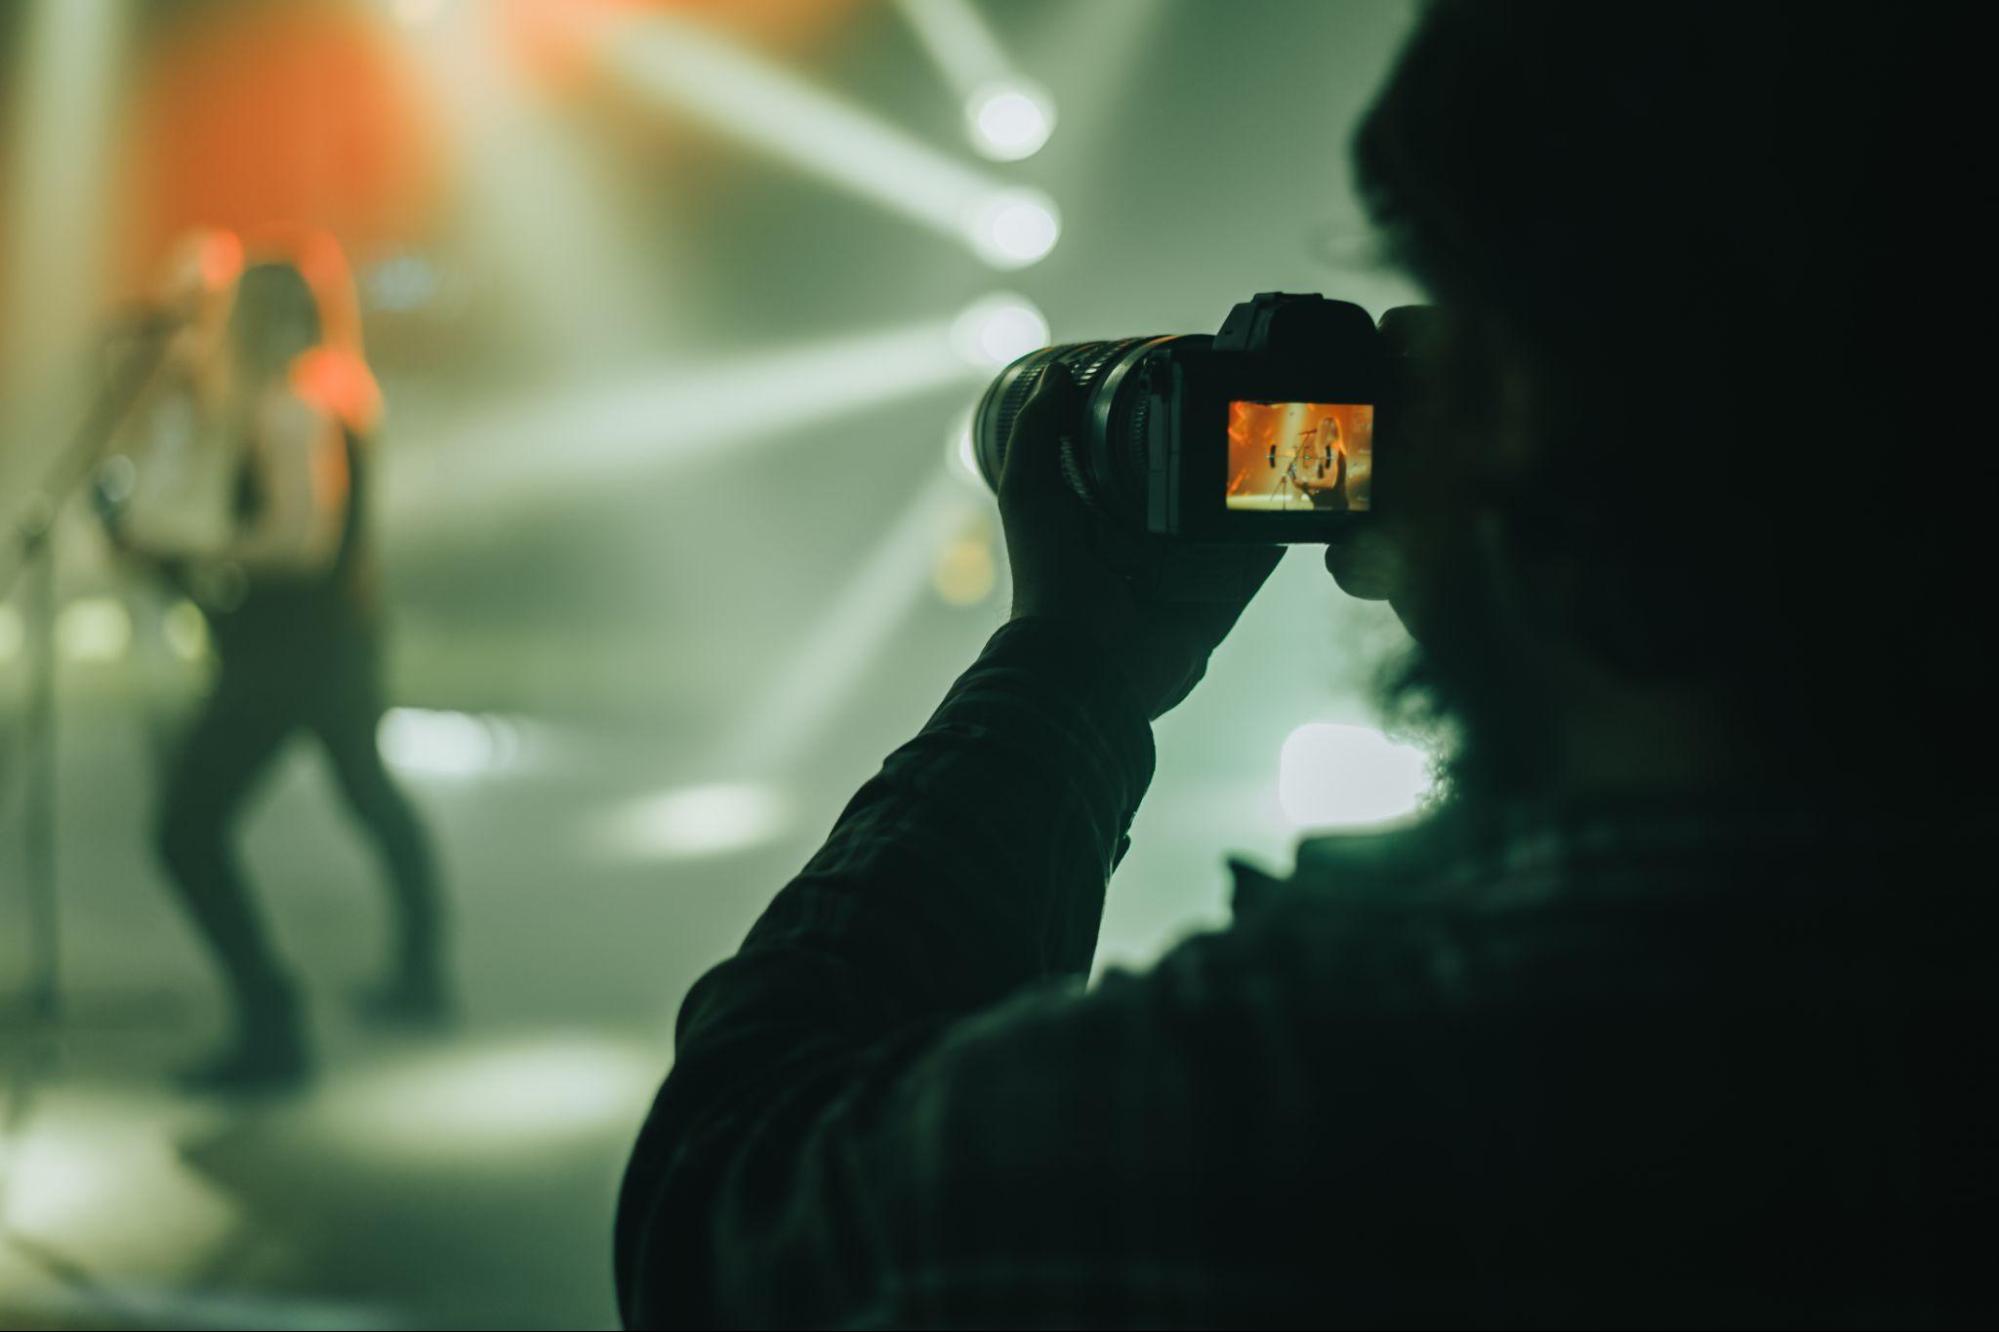 How To Bring A DSLR Camera Into A Music Festival